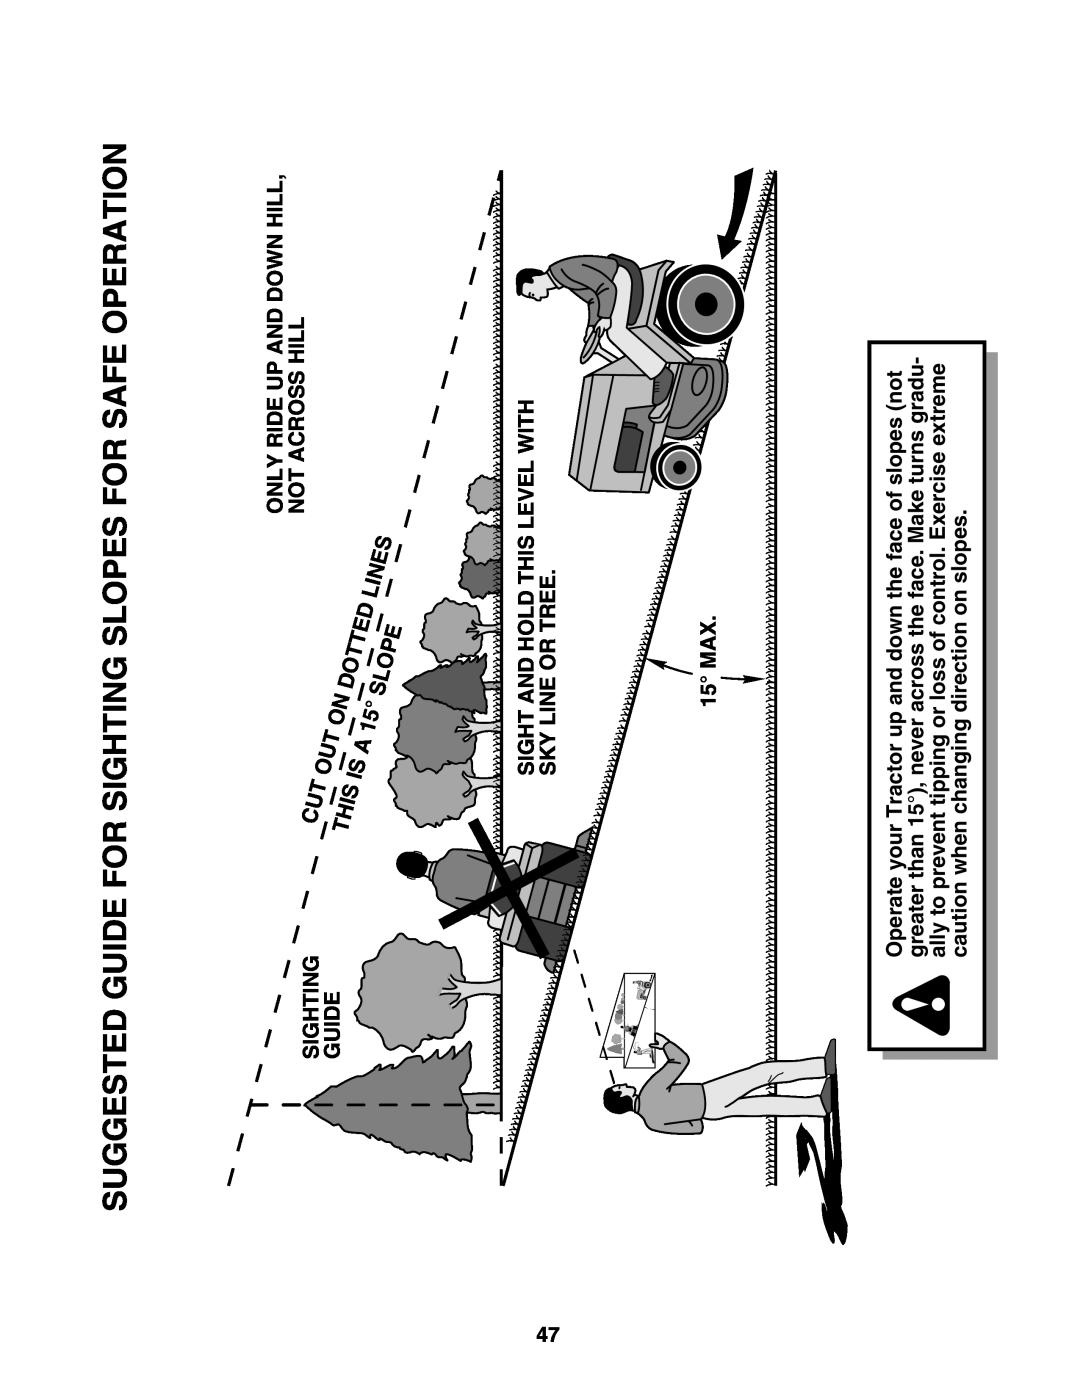 Poulan 178379 Suggested Guide For Sighting Slopes For Safe Operation, Only Ride Up And Down Hill, Not Across Hill, This 